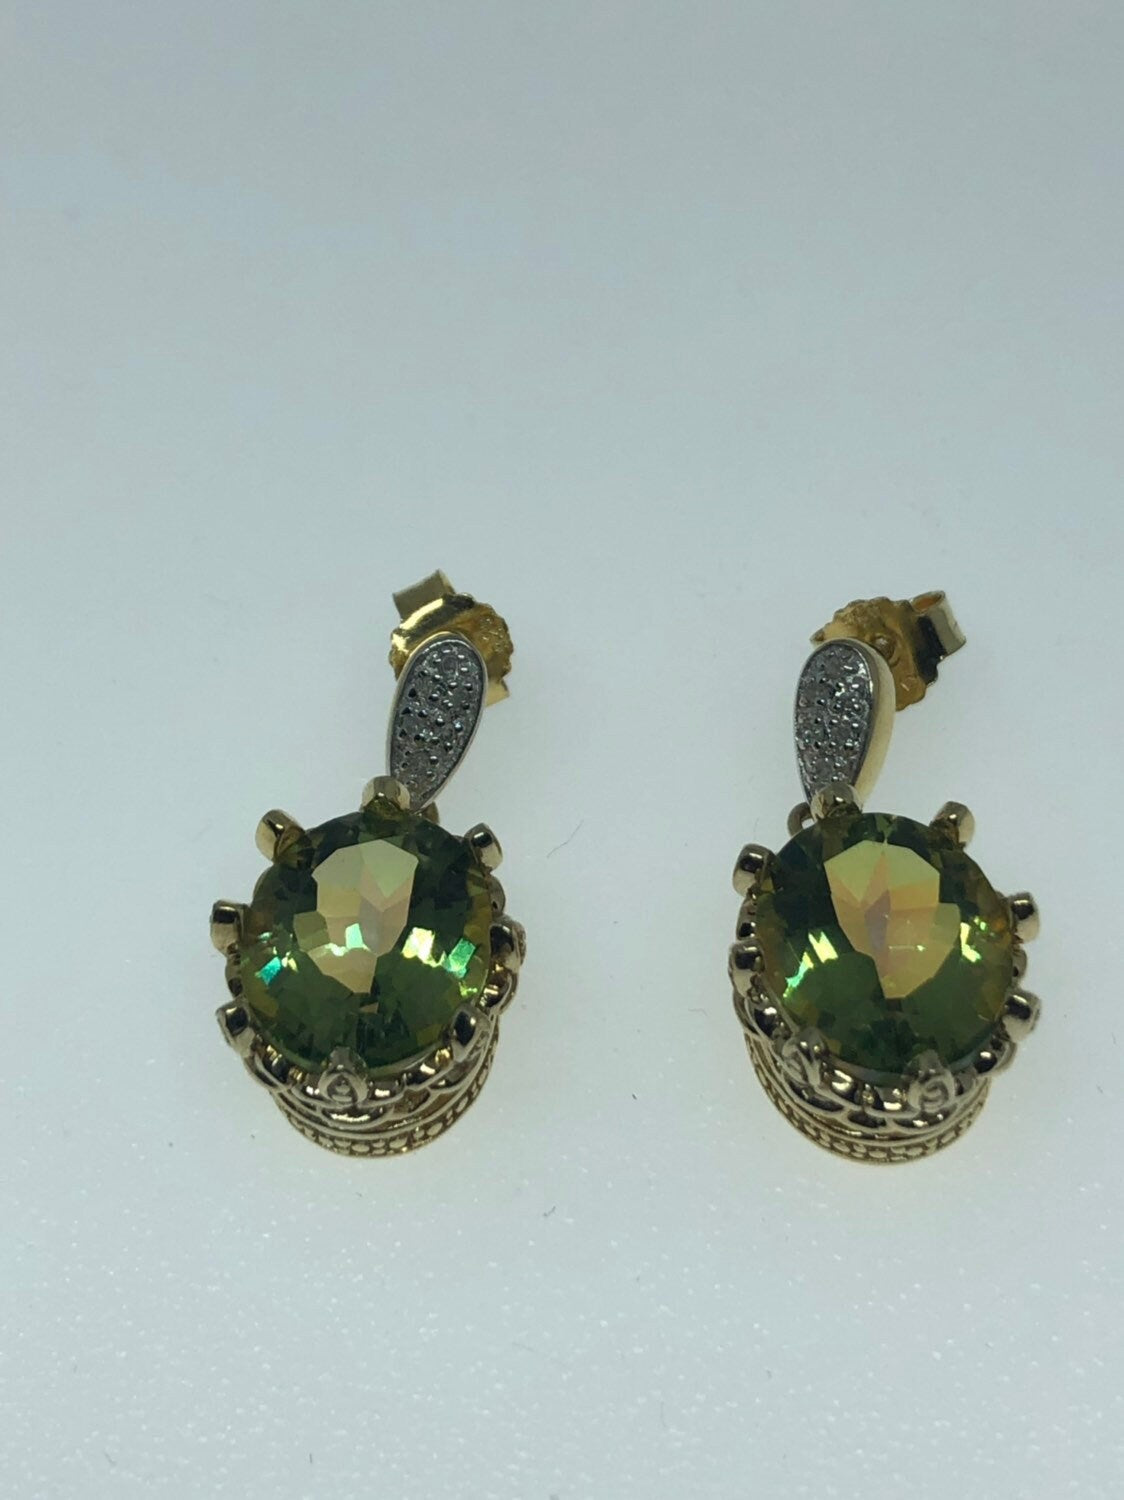 Vintage Handmade Gold Sterling Silver Genuine Green Mystic Peridot and White Sapphire Earrings